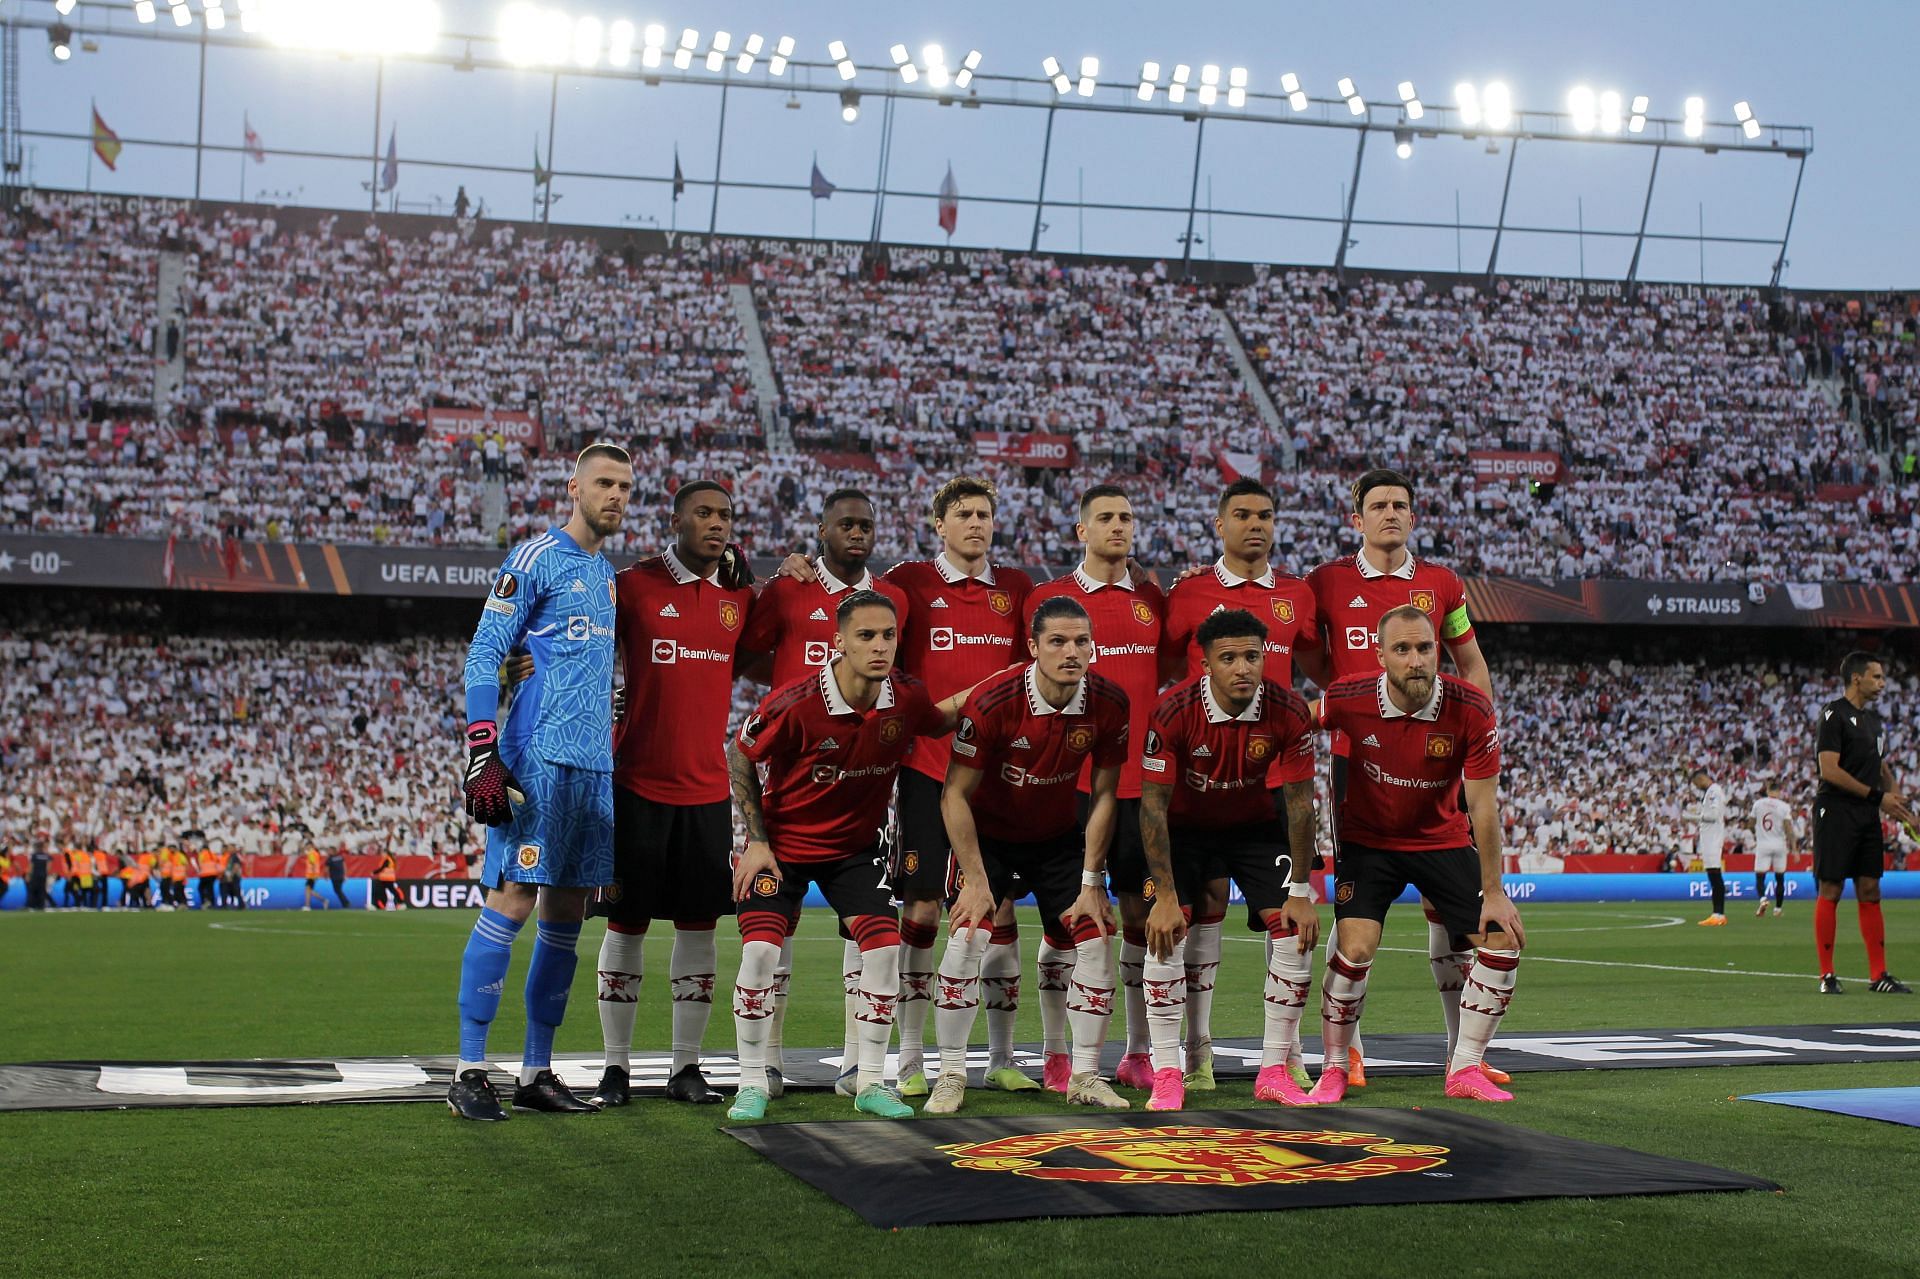 The Red Devils were woefully inept against Sevilla.